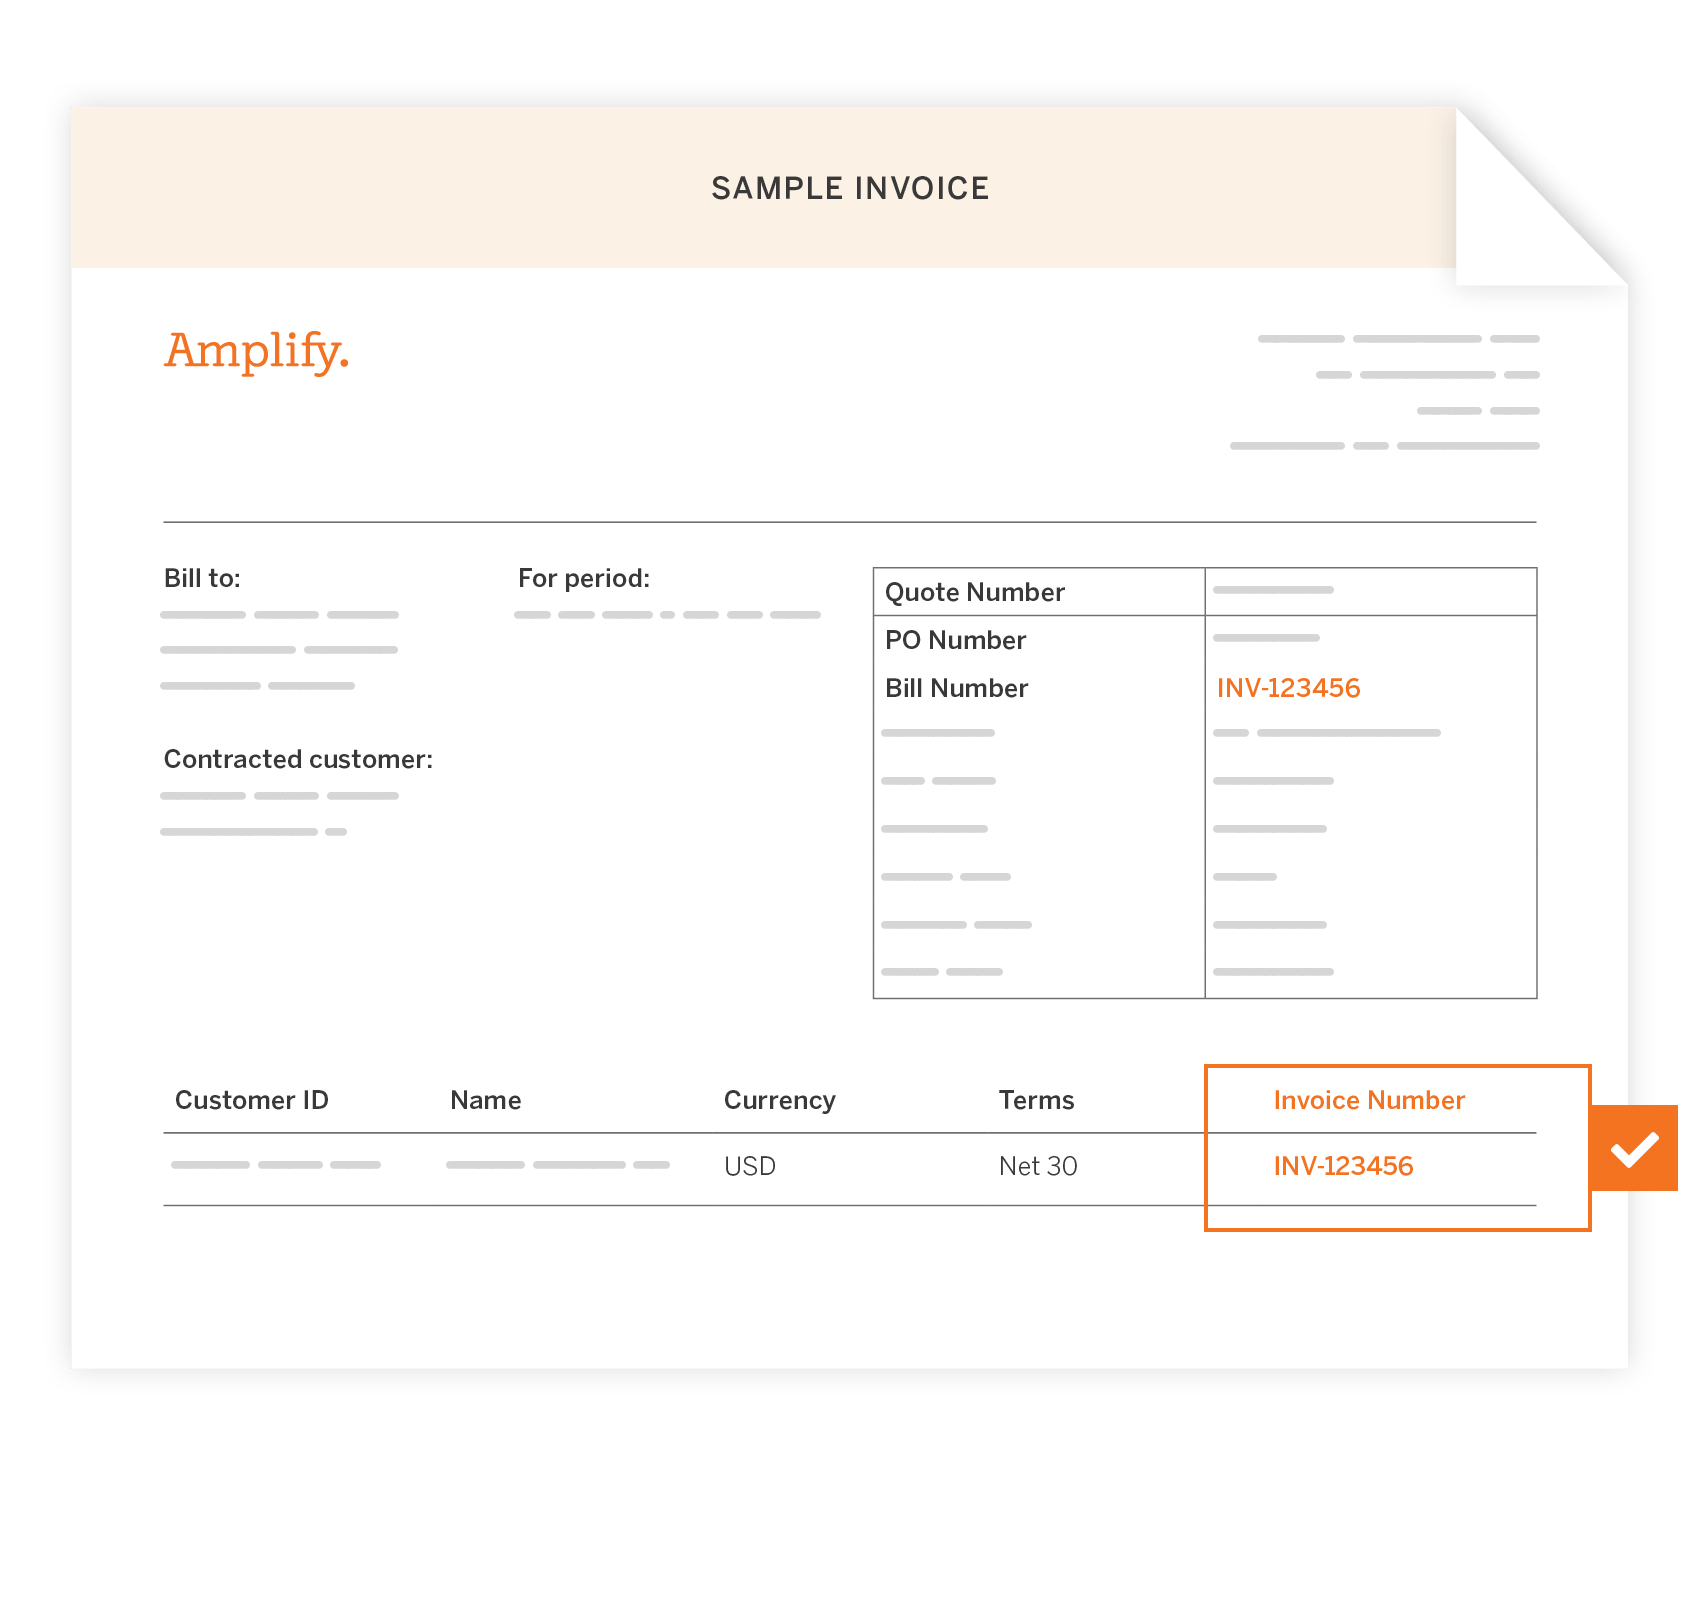 A sample invoice template with labeled fields for billing details such as customer id, name, currency, and terms, featuring a prominent invoice number inv-123456.